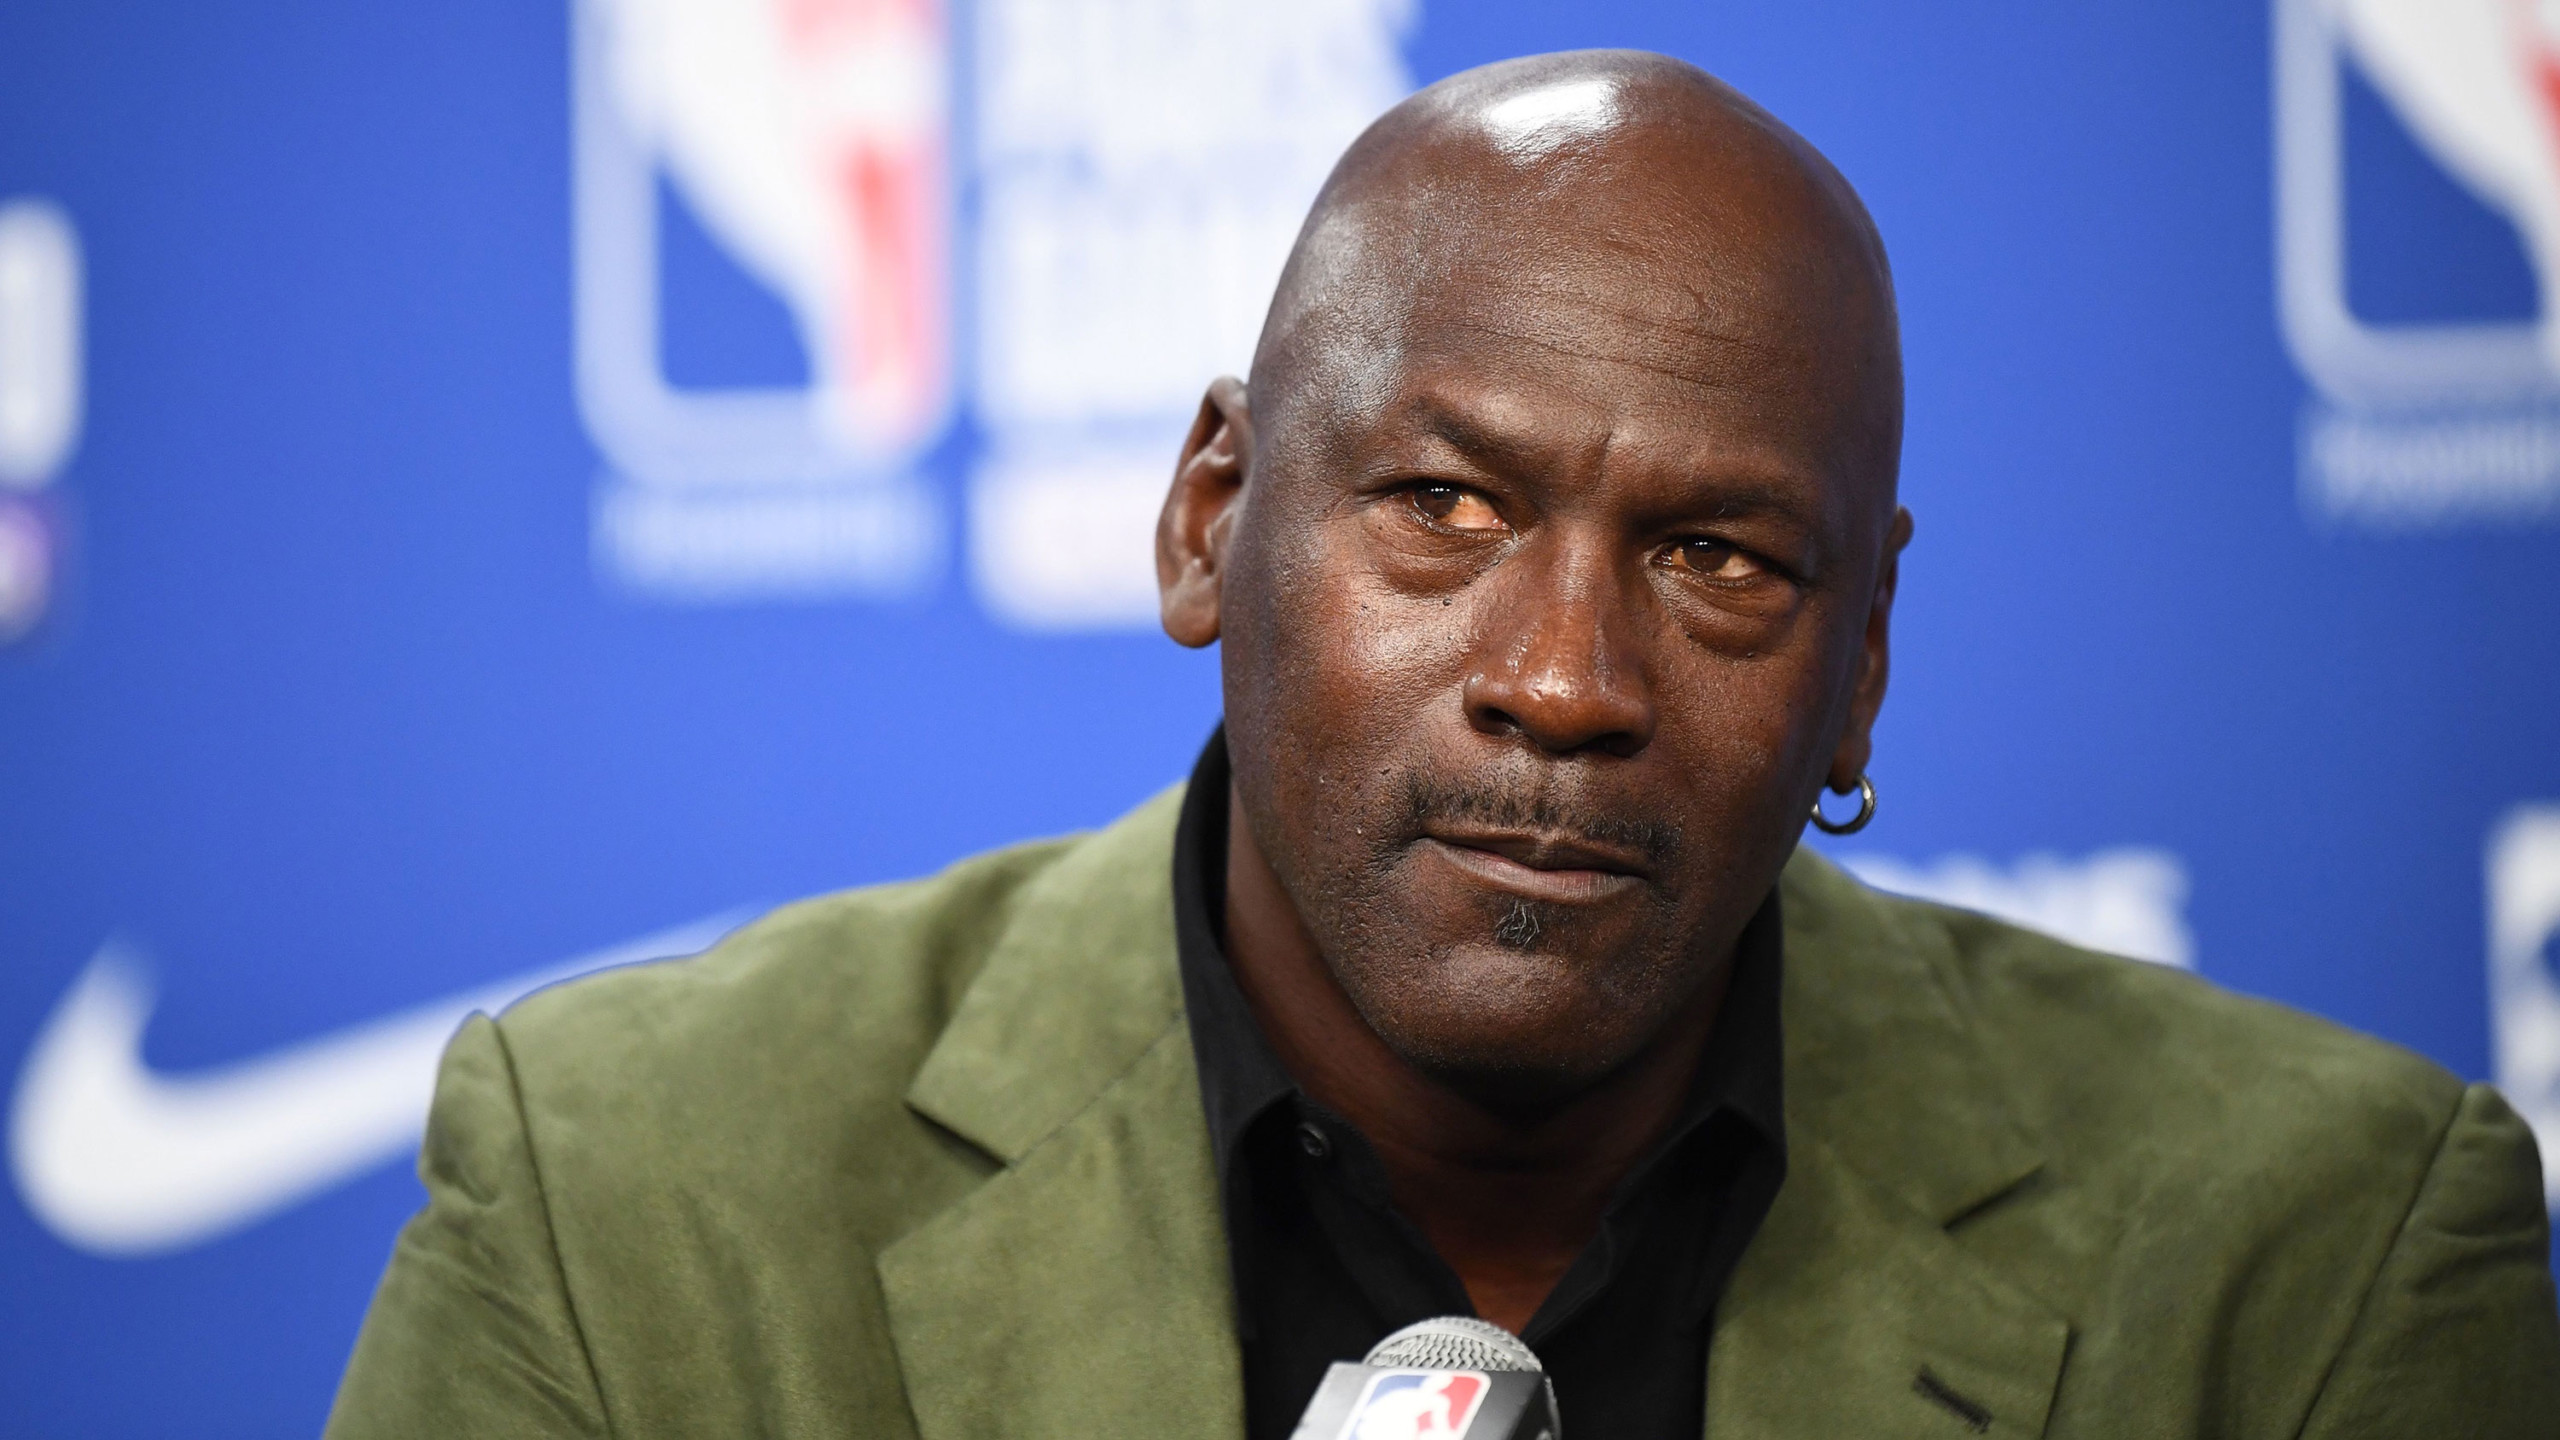 Michael Jordan to present Kobe Bryant at Hall of Fame induction ceremony 